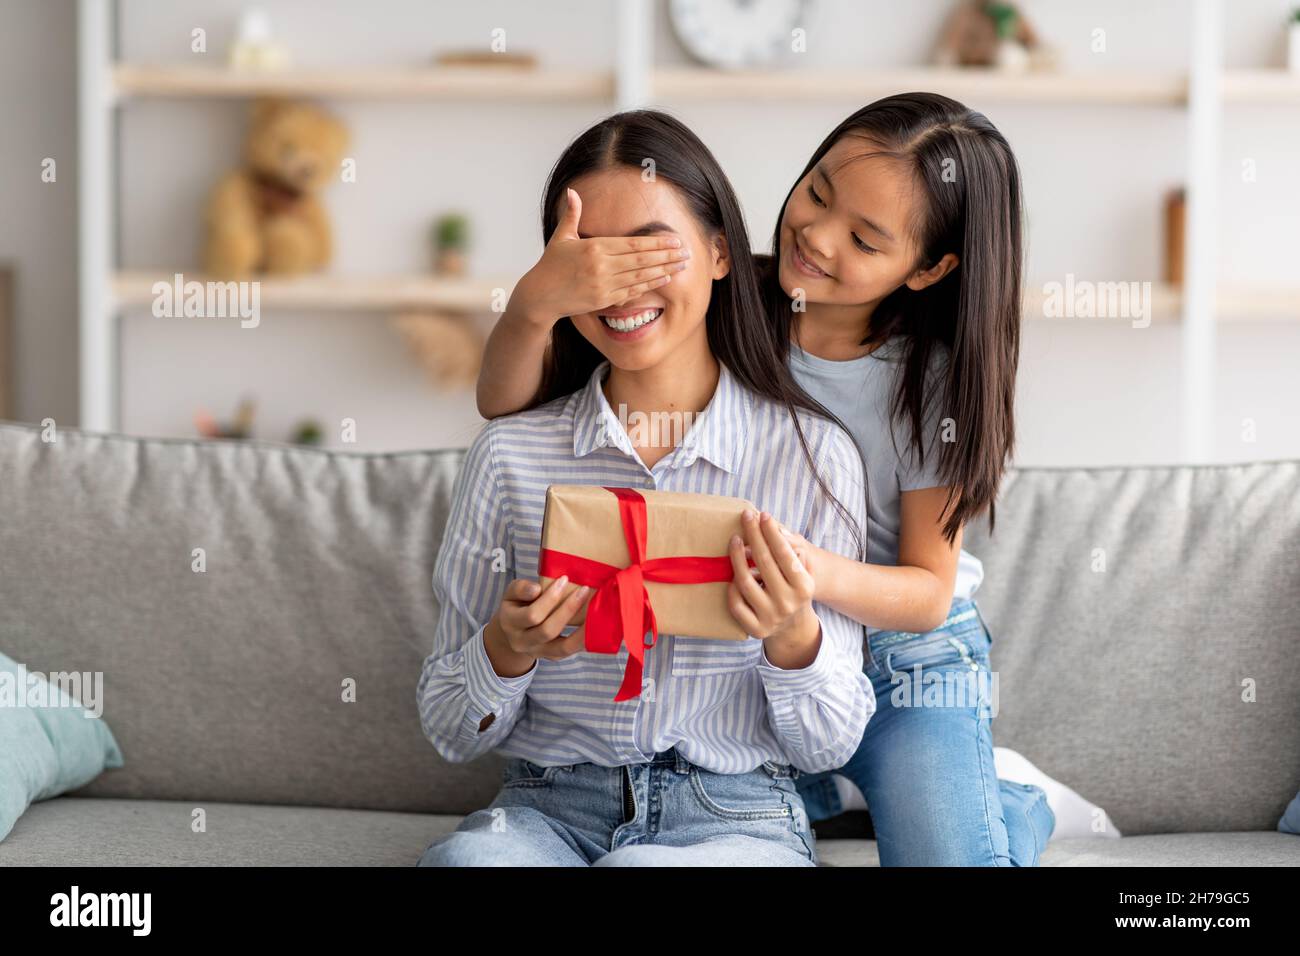 https://c8.alamy.com/comp/2H79GC5/playful-asian-girl-making-surprise-for-her-happy-mother-closing-her-eyes-and-giving-gift-box-while-sitting-on-couch-2H79GC5.jpg